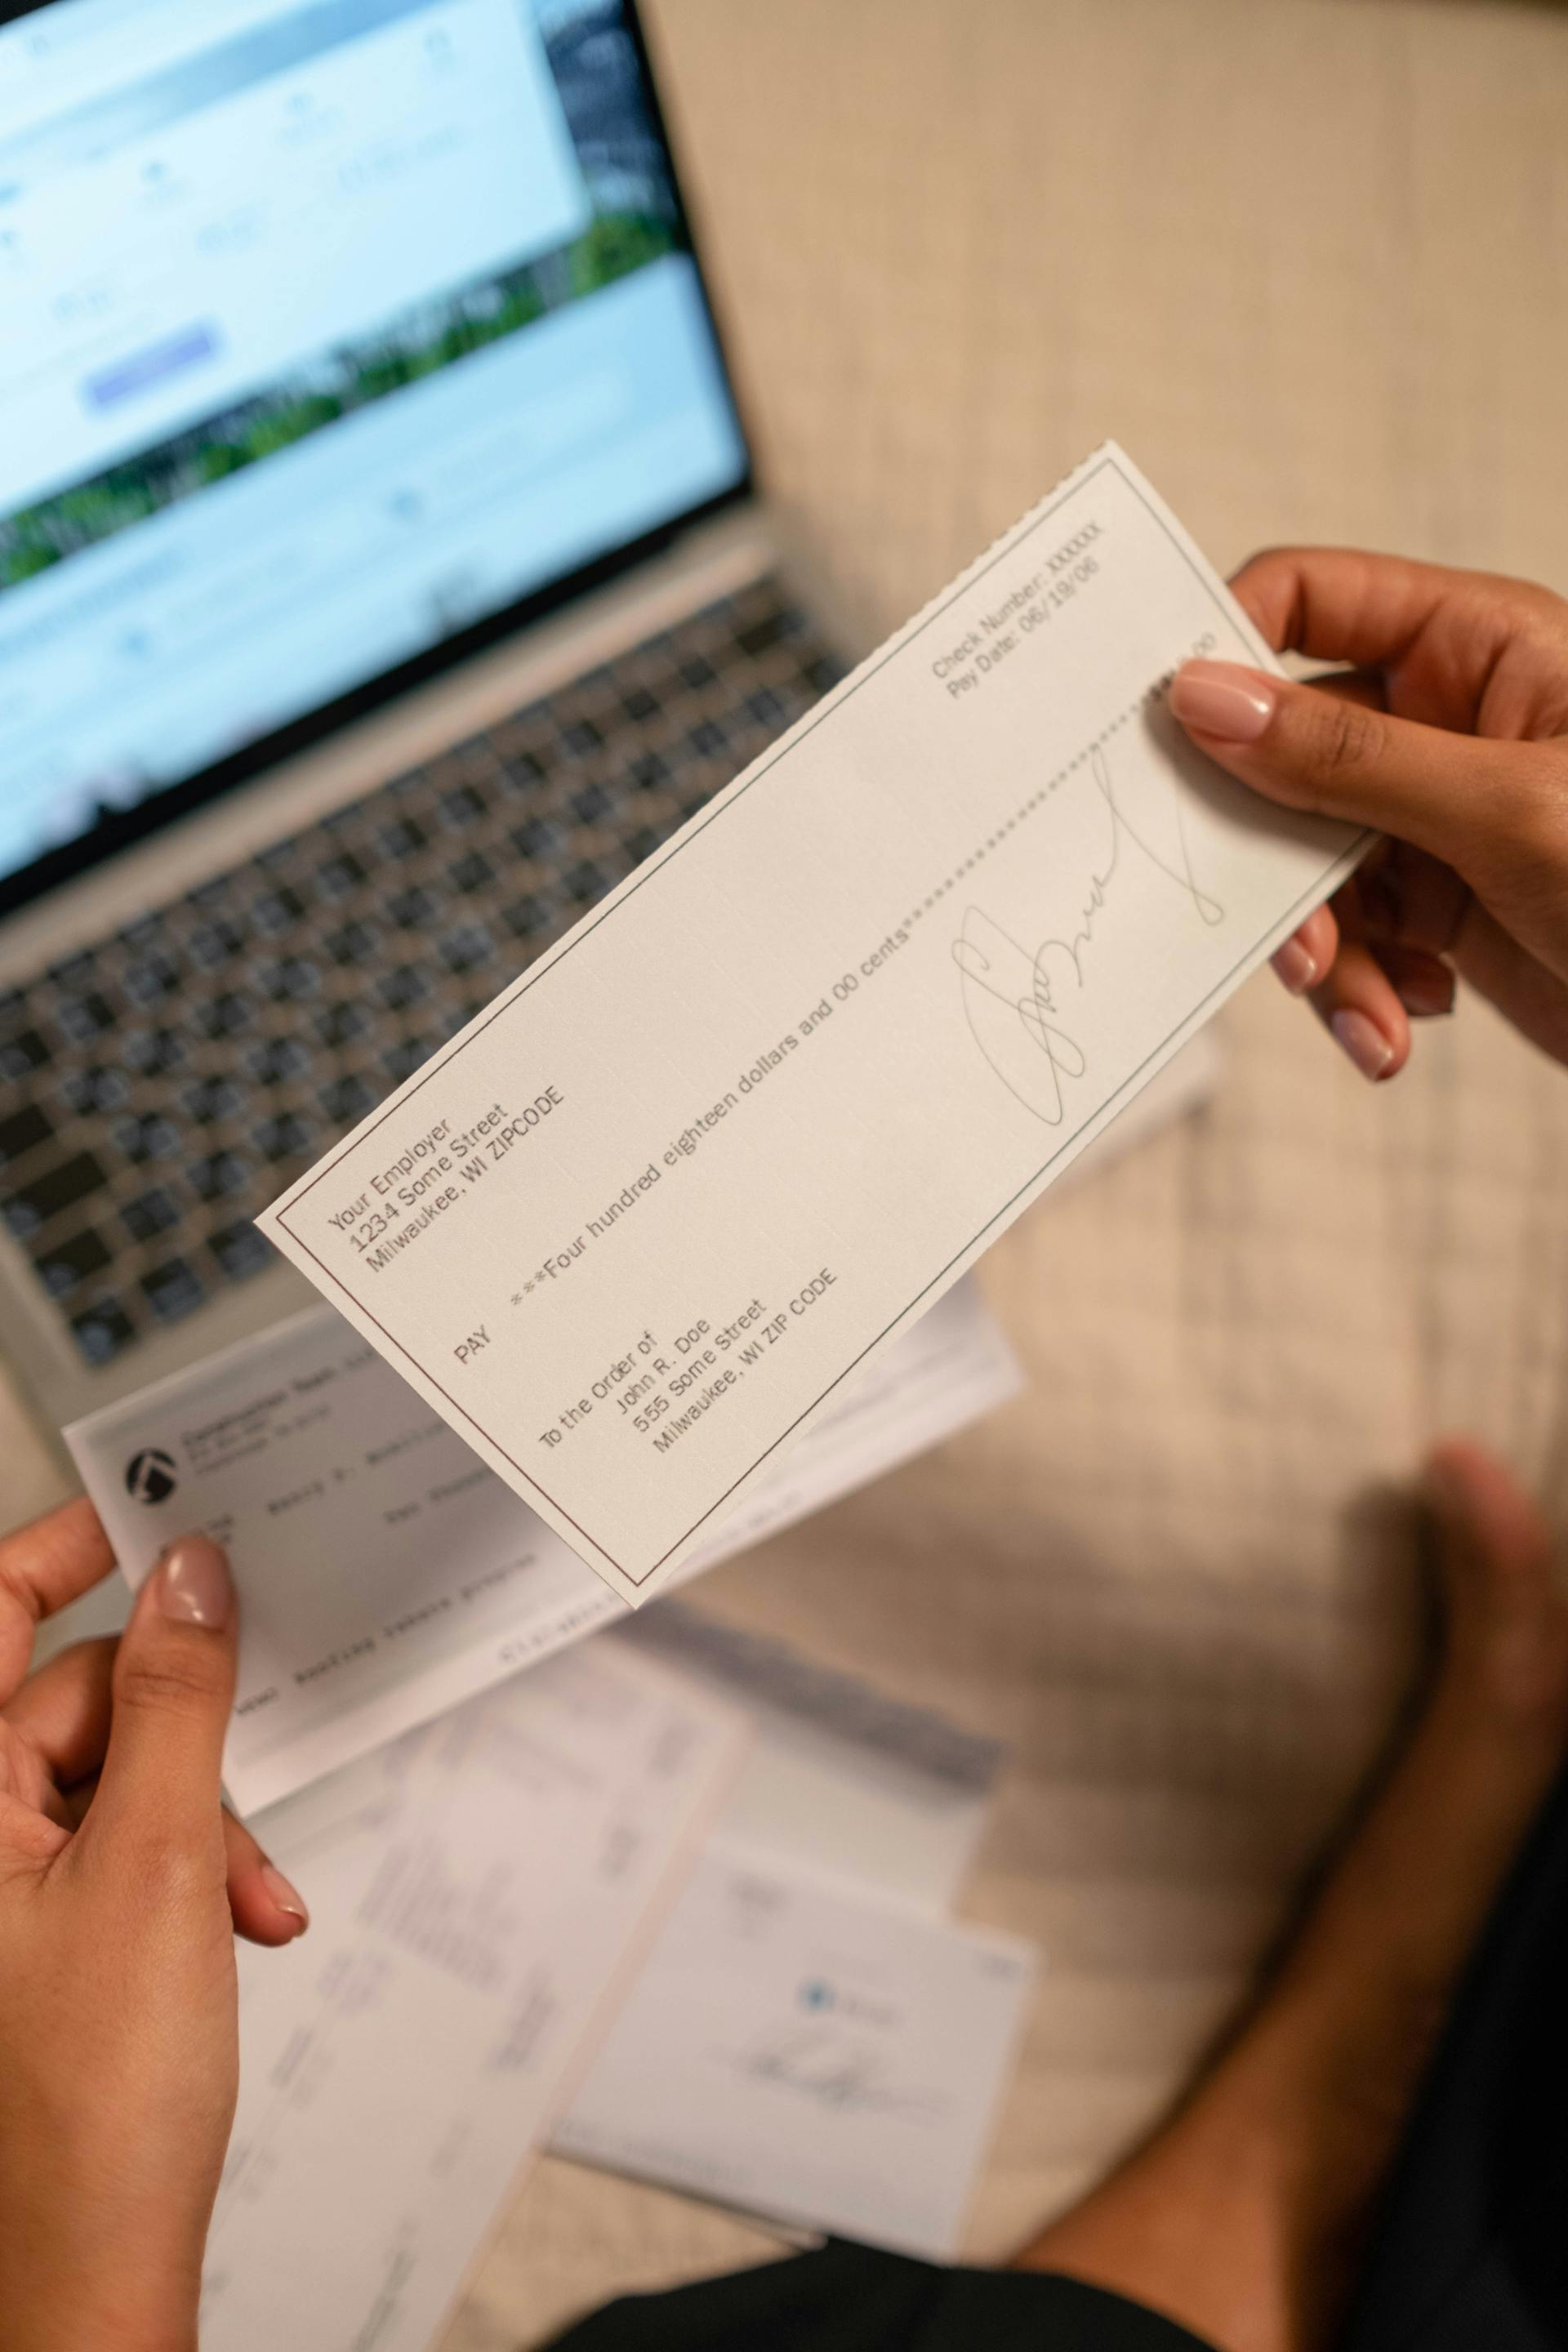 A person holding a cheque | Source: Pexels